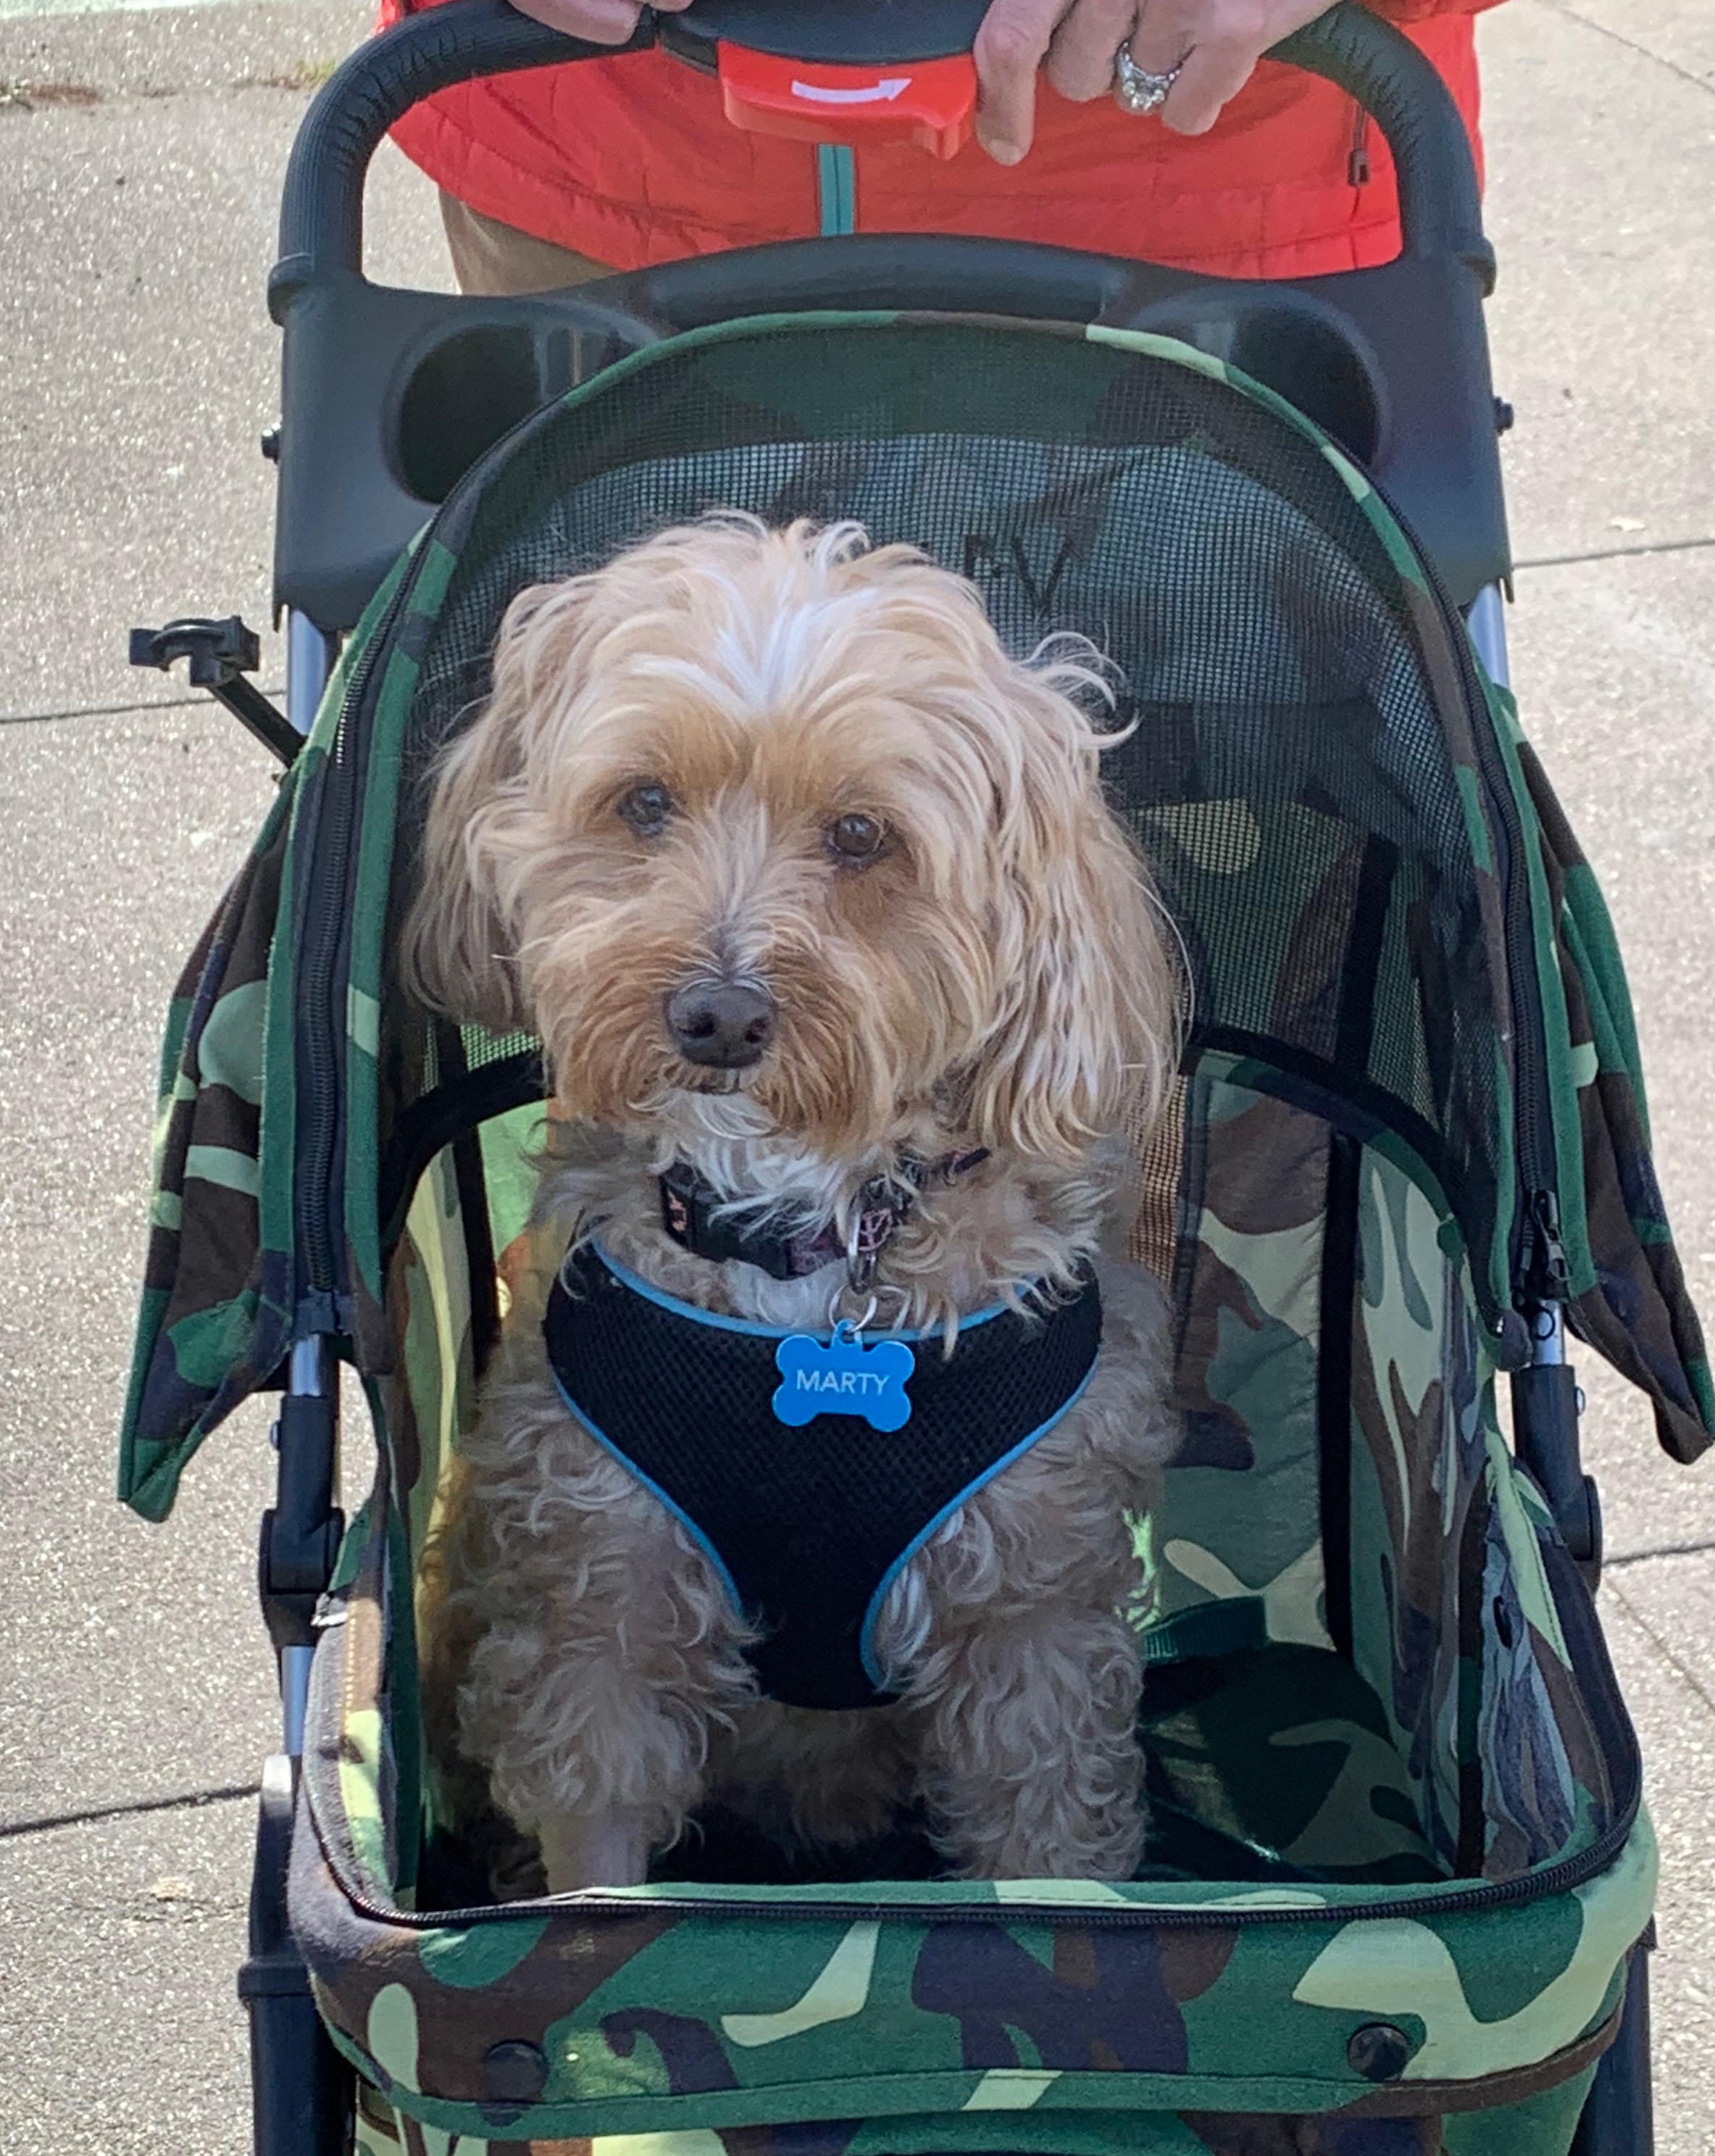 Yorkshire Terrier Poodle Mix In Baby Carriage